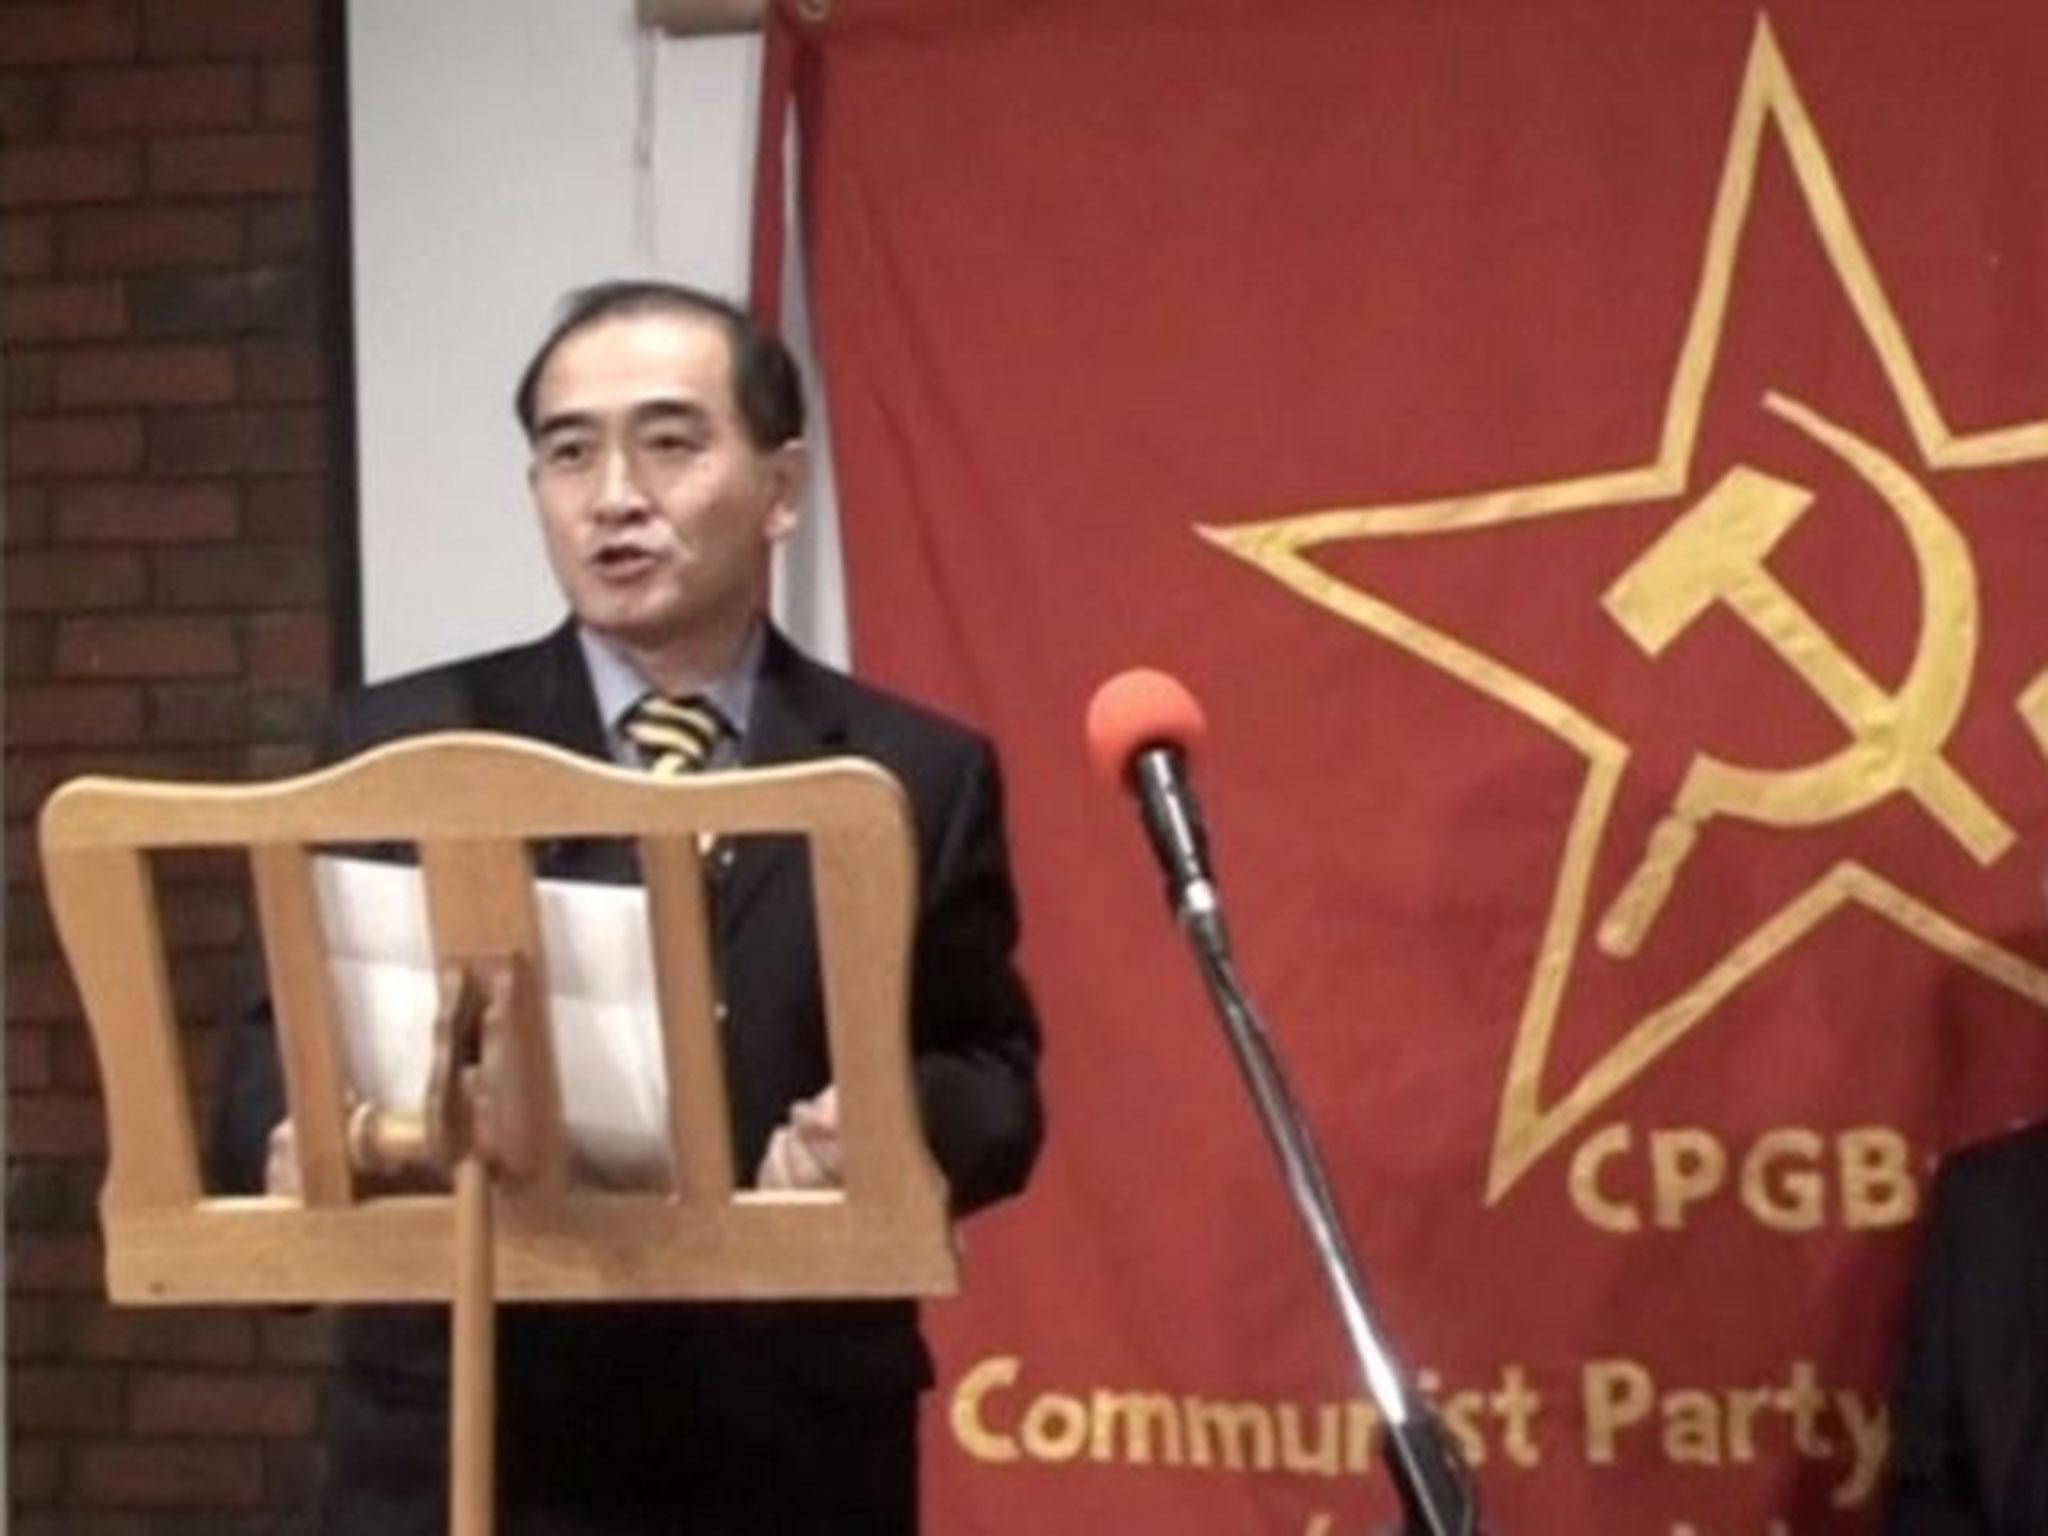 Thae Yong Ho, North Korea's deputy ambassador in London who has defected with his family, speaks on a podium in London, Britain in a still image taken on 17 August, 2016 from file footage